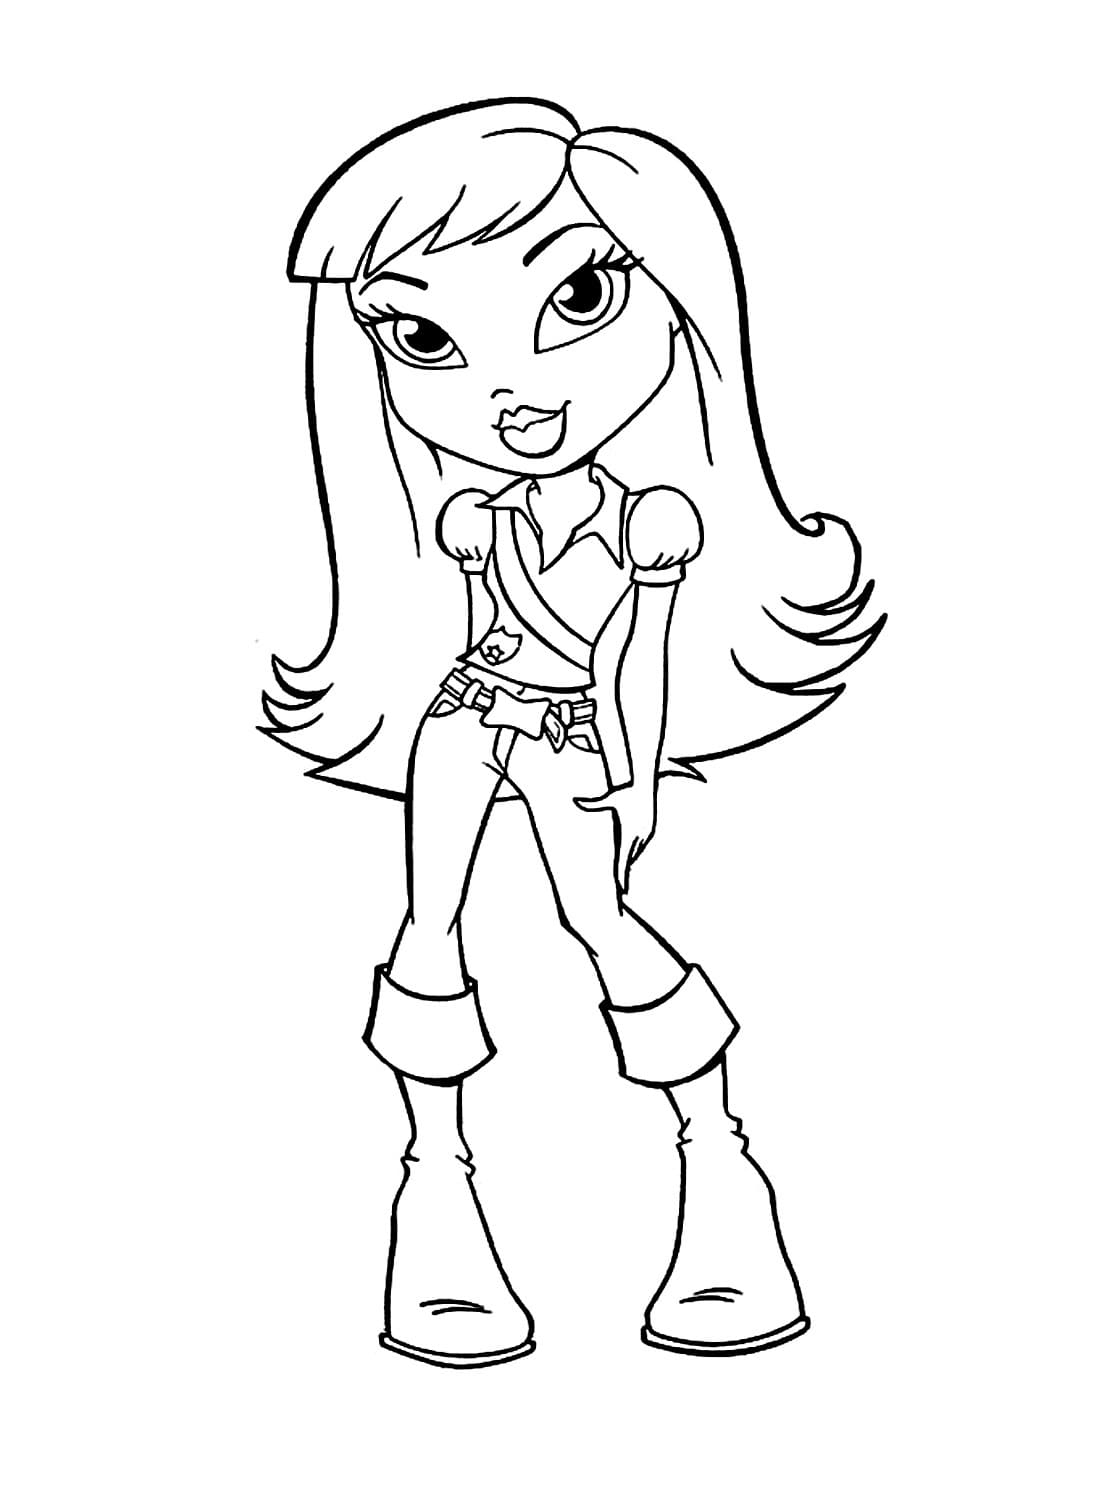 Meygan Bratz coloring page - Download, Print or Color Online for Free